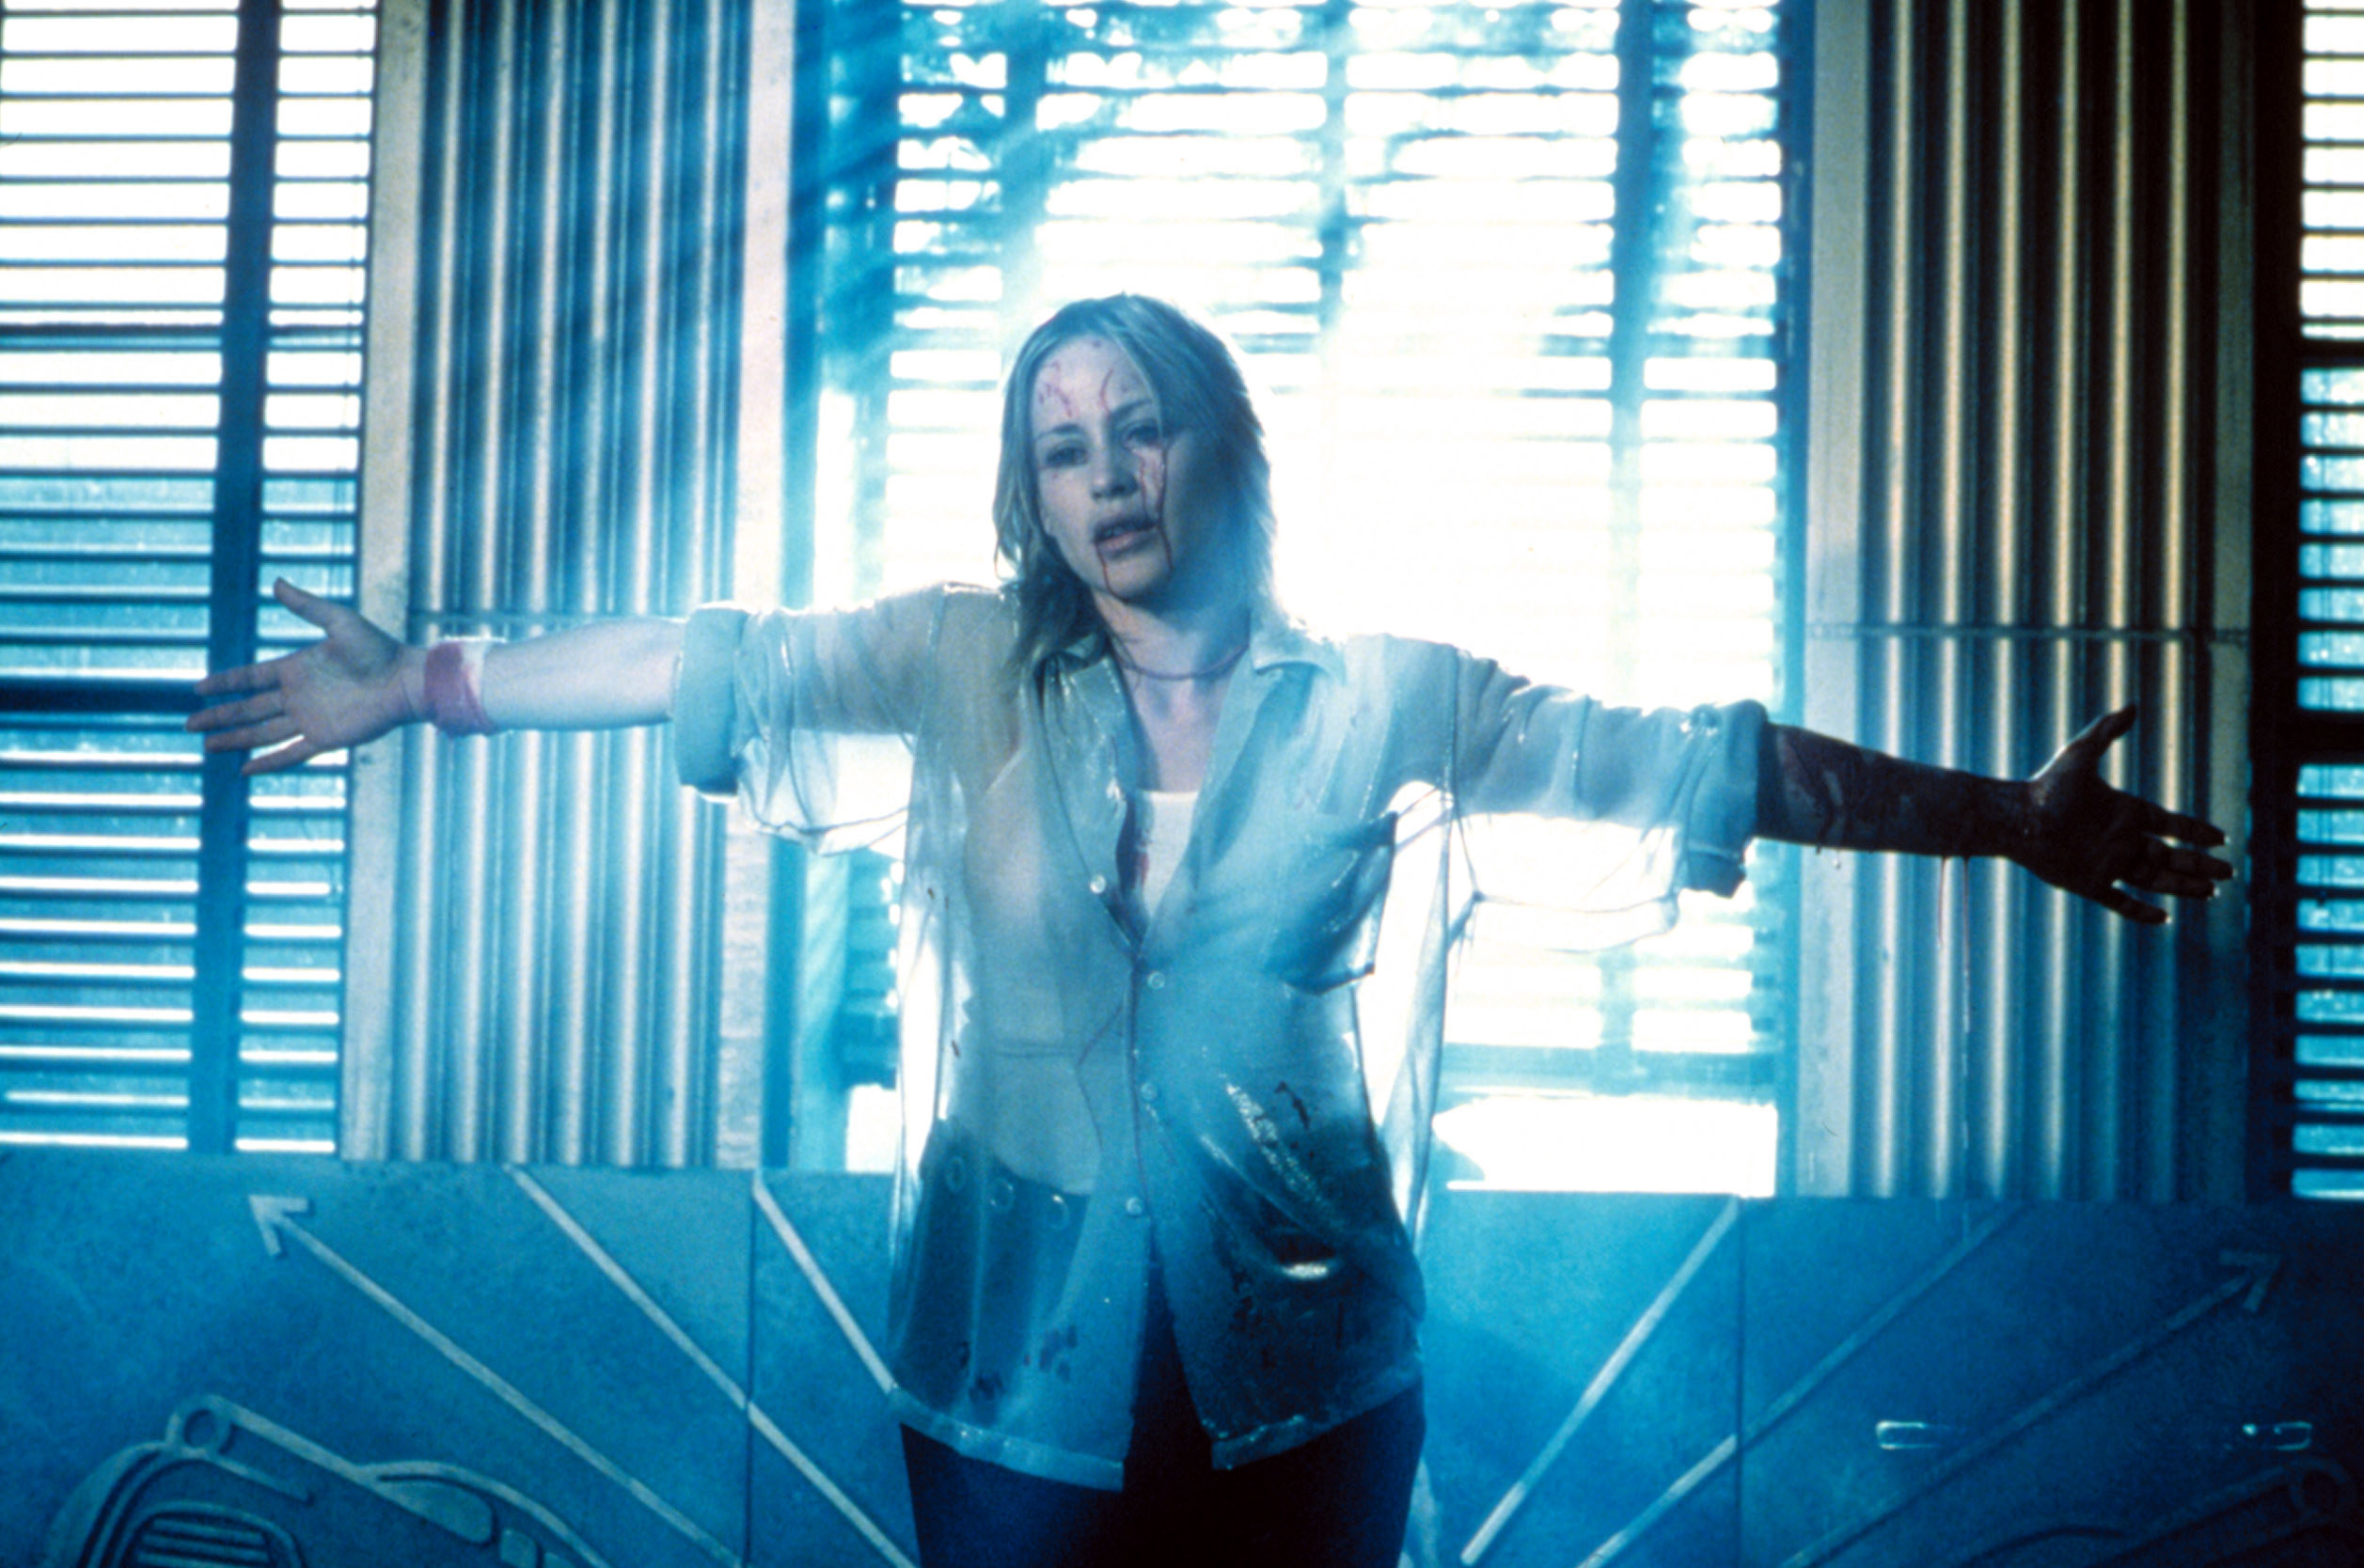 Patricia Arquette as Frankie, standing with her arms out and blood dripping down her face